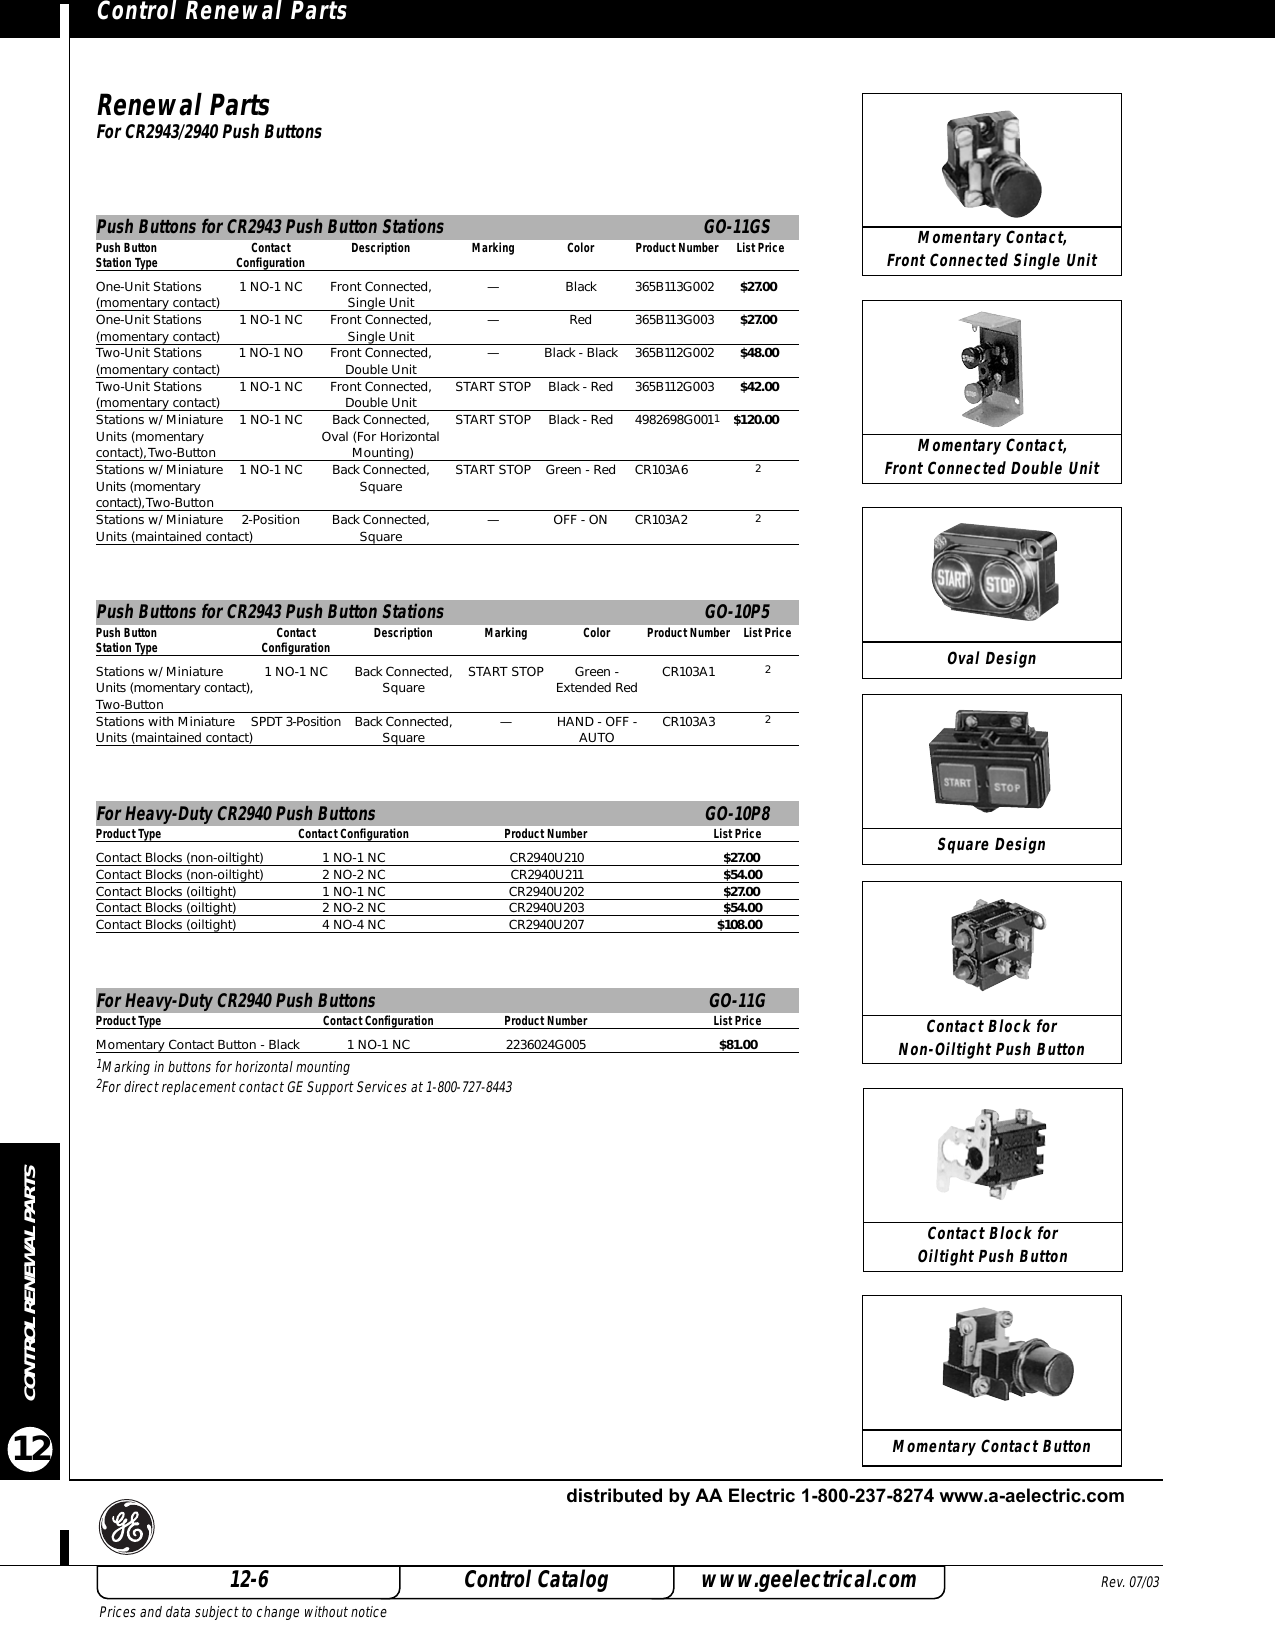 Page 6 of 8 - GE 2005 Control Catalog - Section 12  522426-Catalog